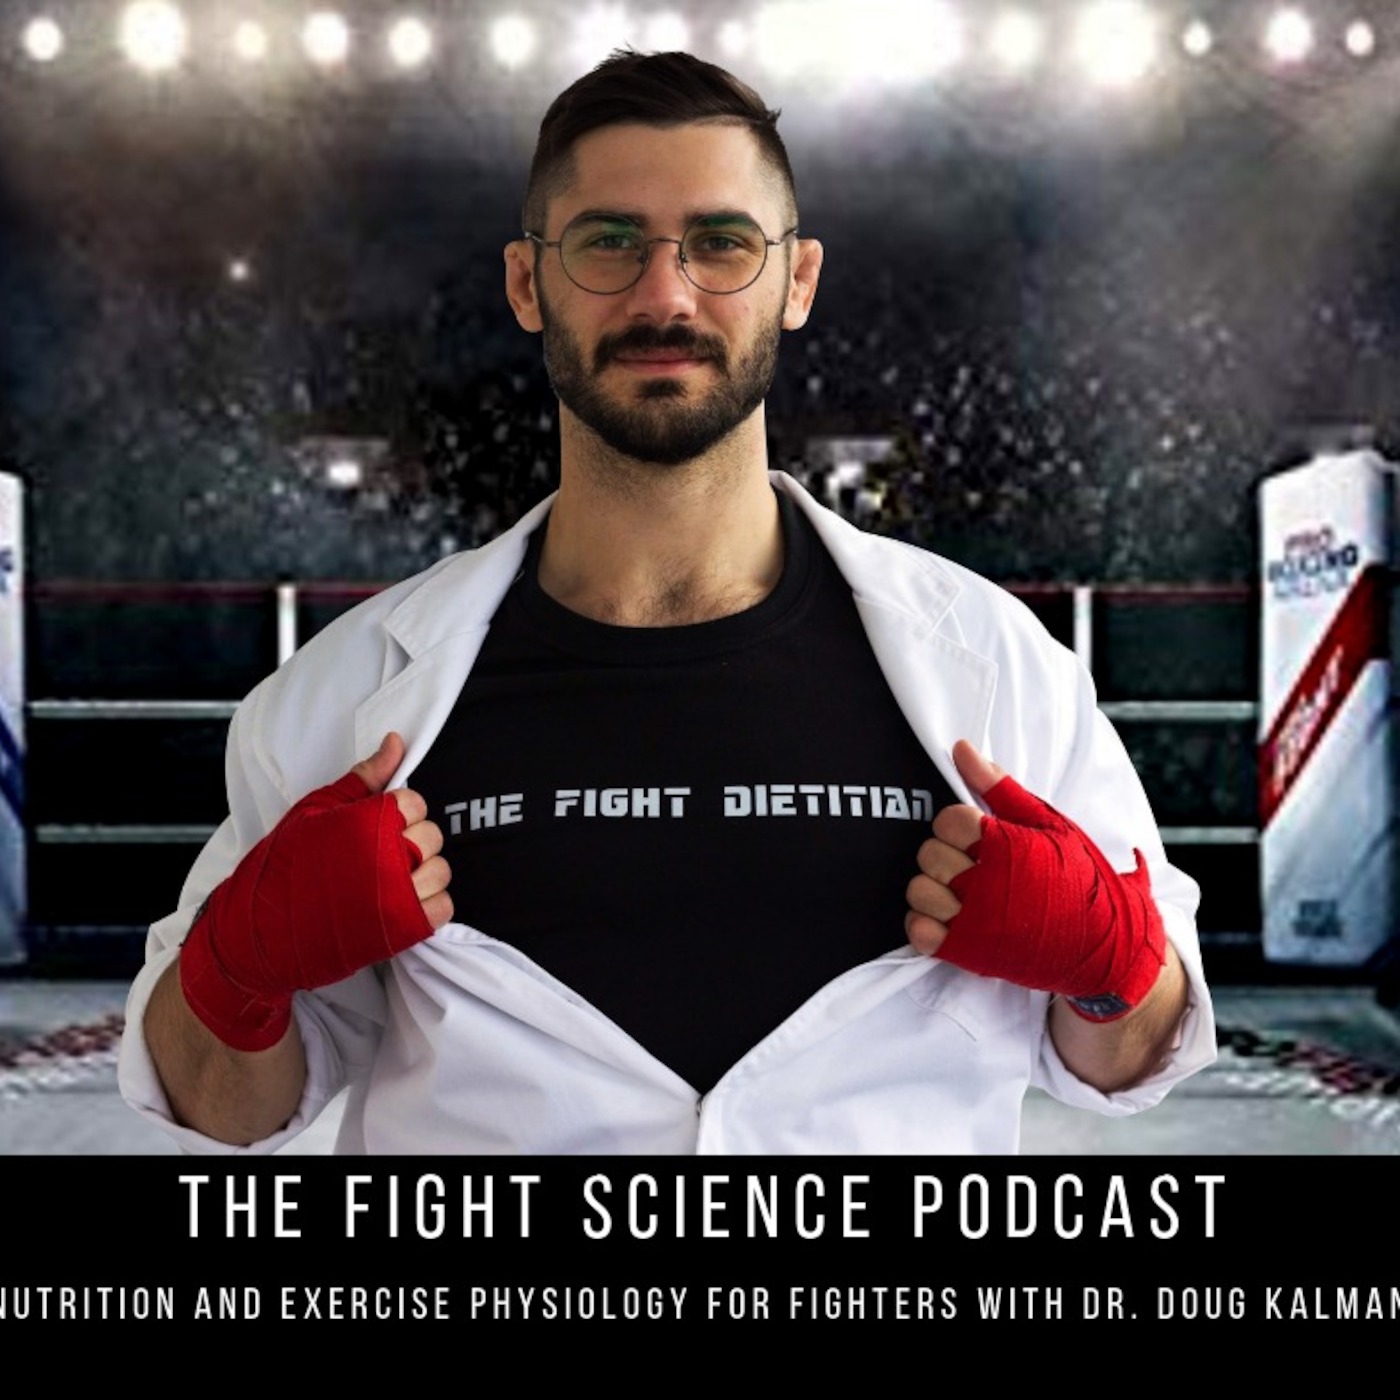 Nutrition and Exercise Physiology for Fighters with Dr. Doug Kalman